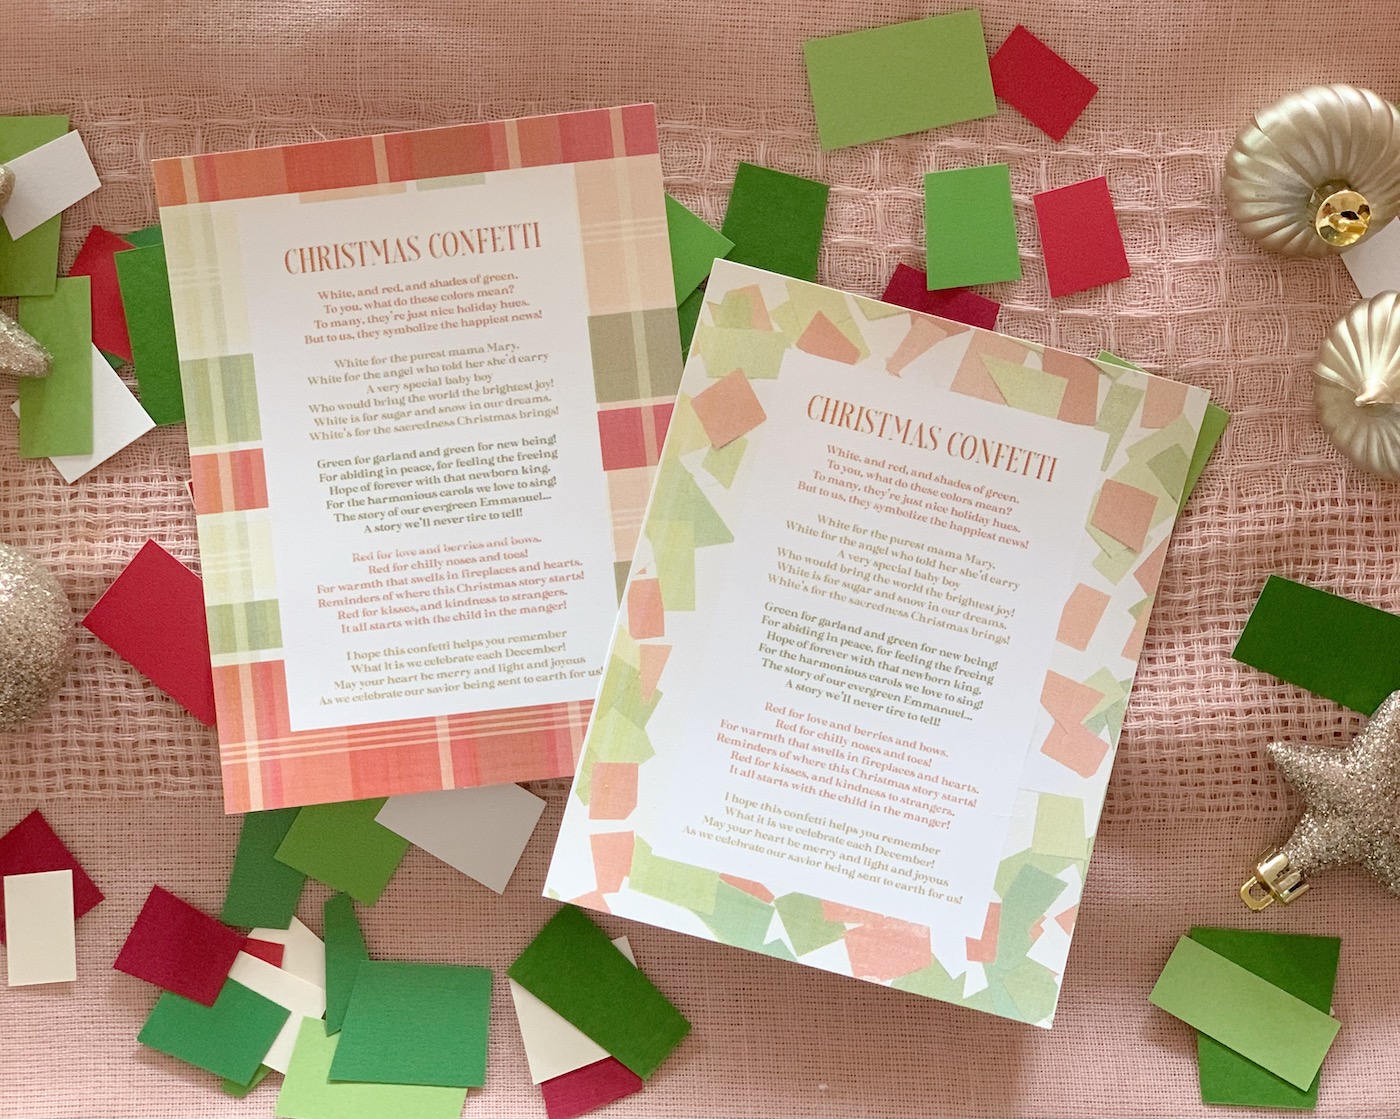 CHRISTMAS CONFETTI - a poem that keeps the focus on JESUS while also helping create some magic and whimsy! Get your printable now! 